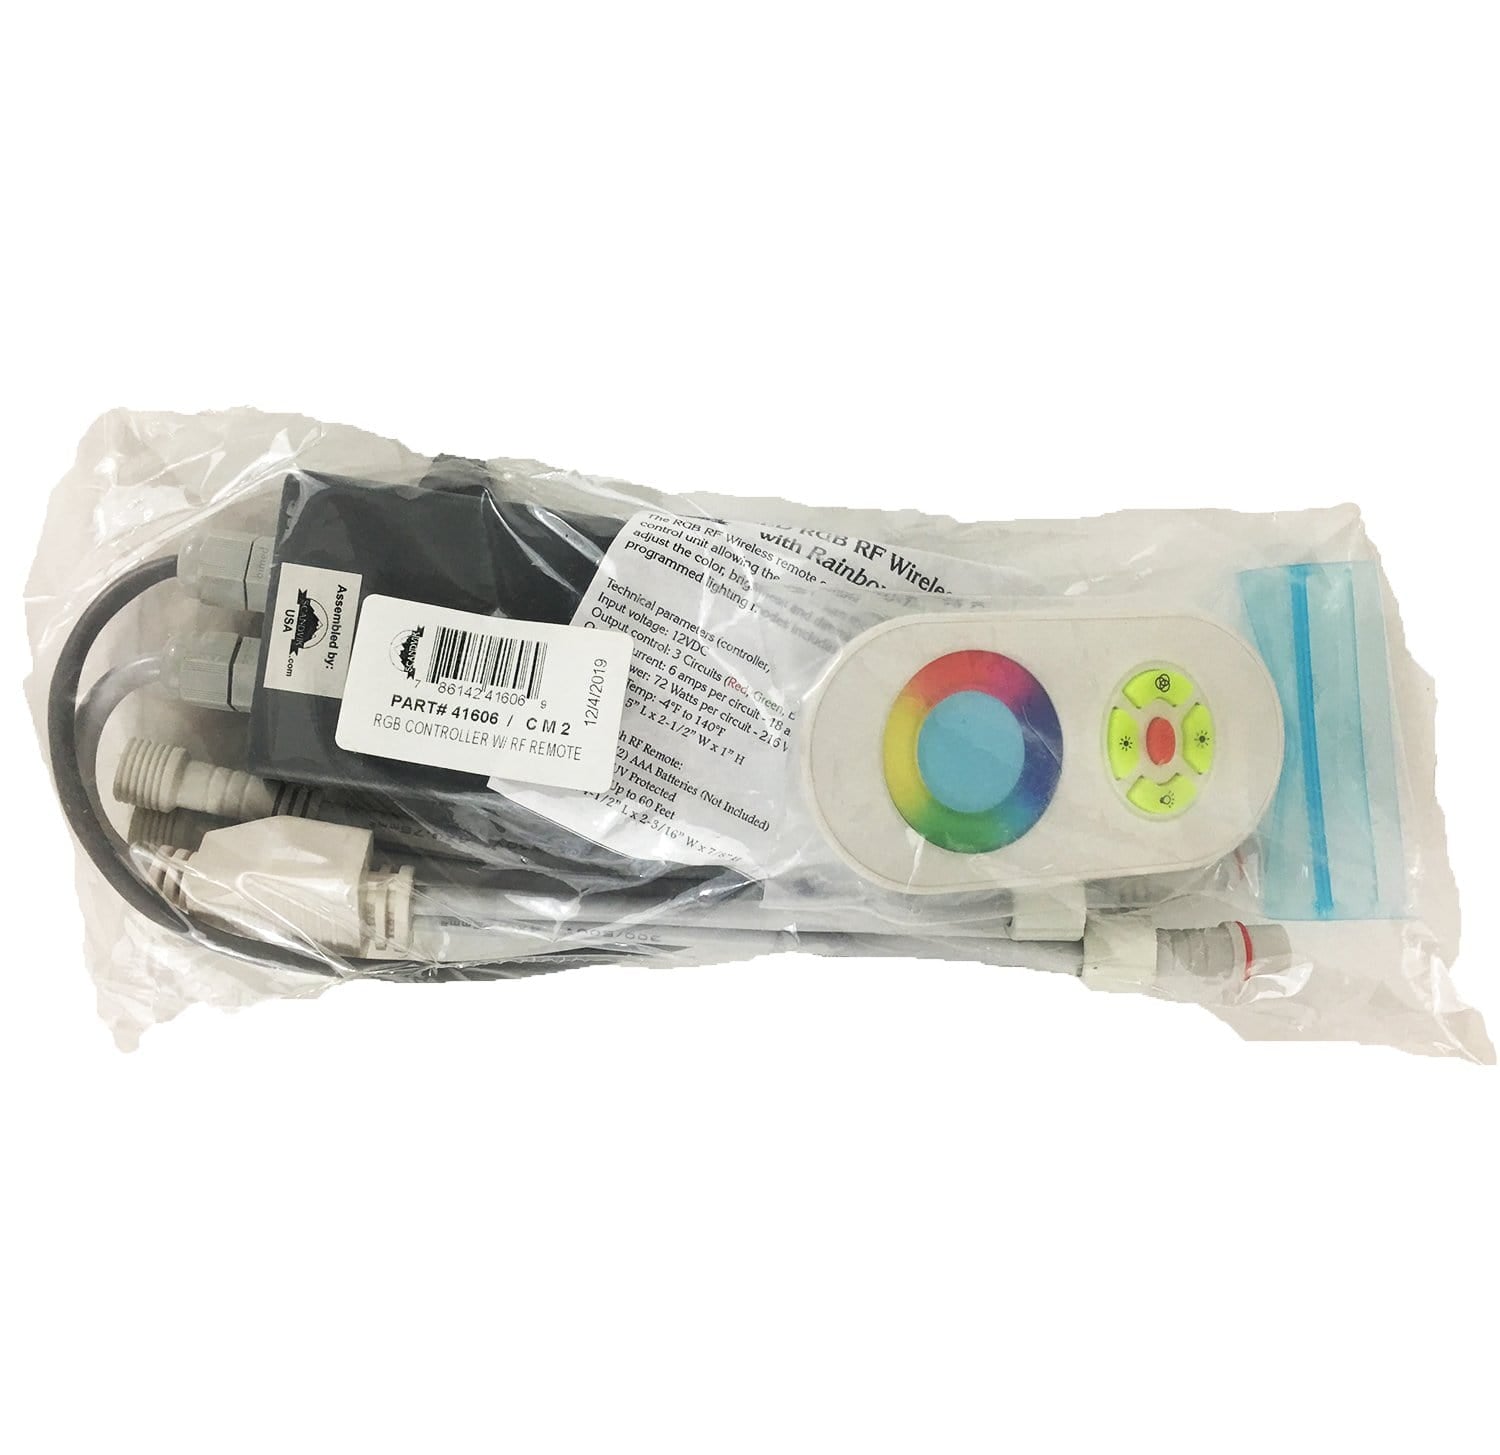 Scandvik 41606 RF LED RGB Controller with Rainbow-Touch Remote